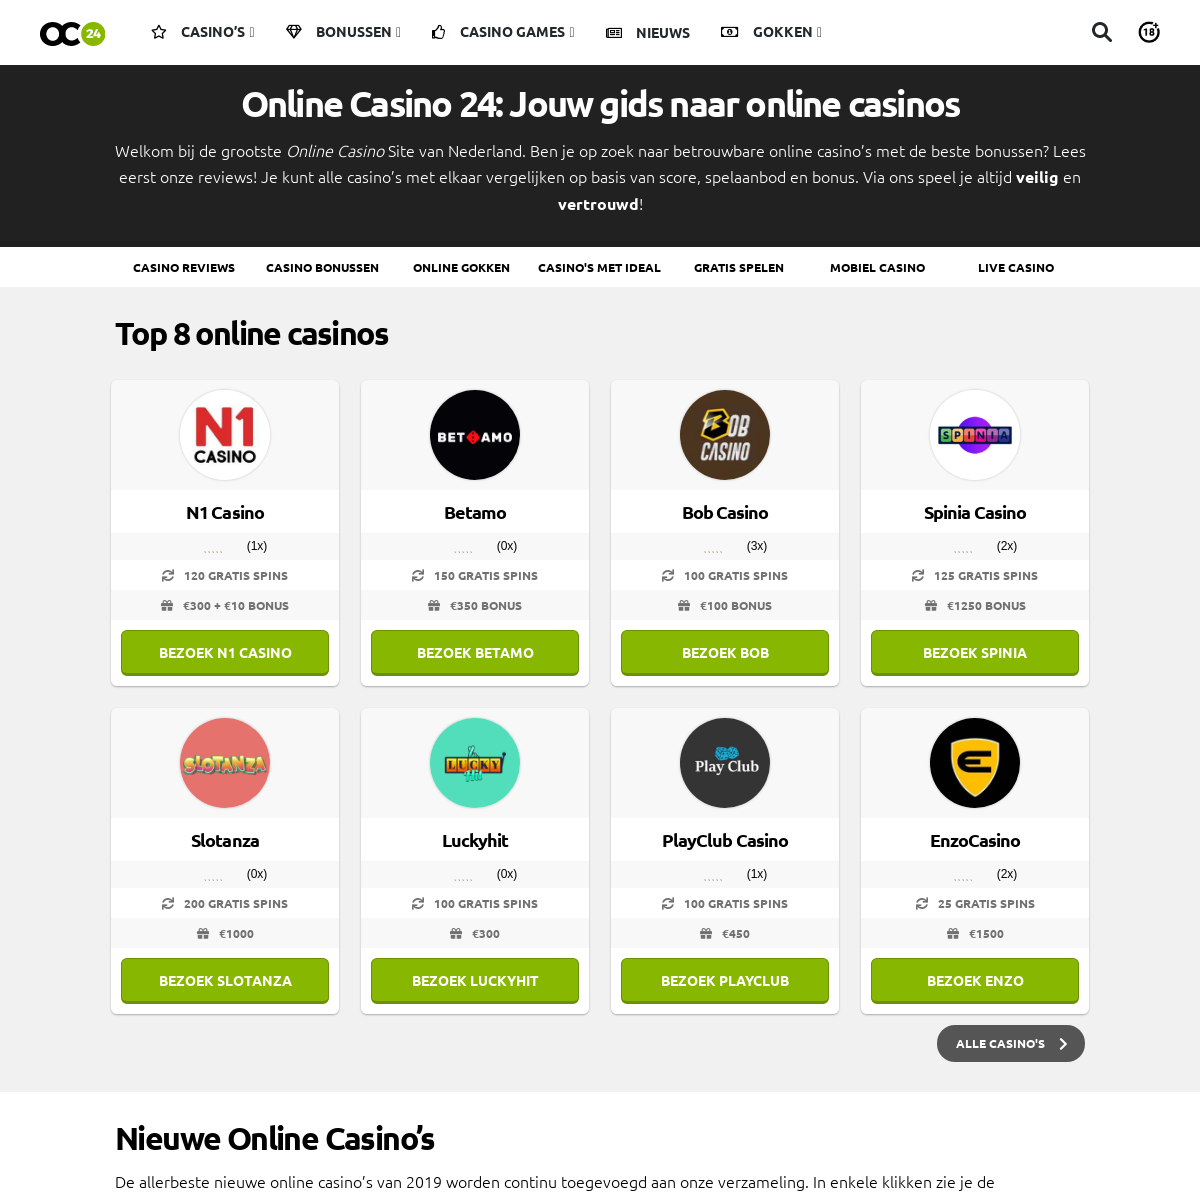 A complete backup of onlinecasino24.nl